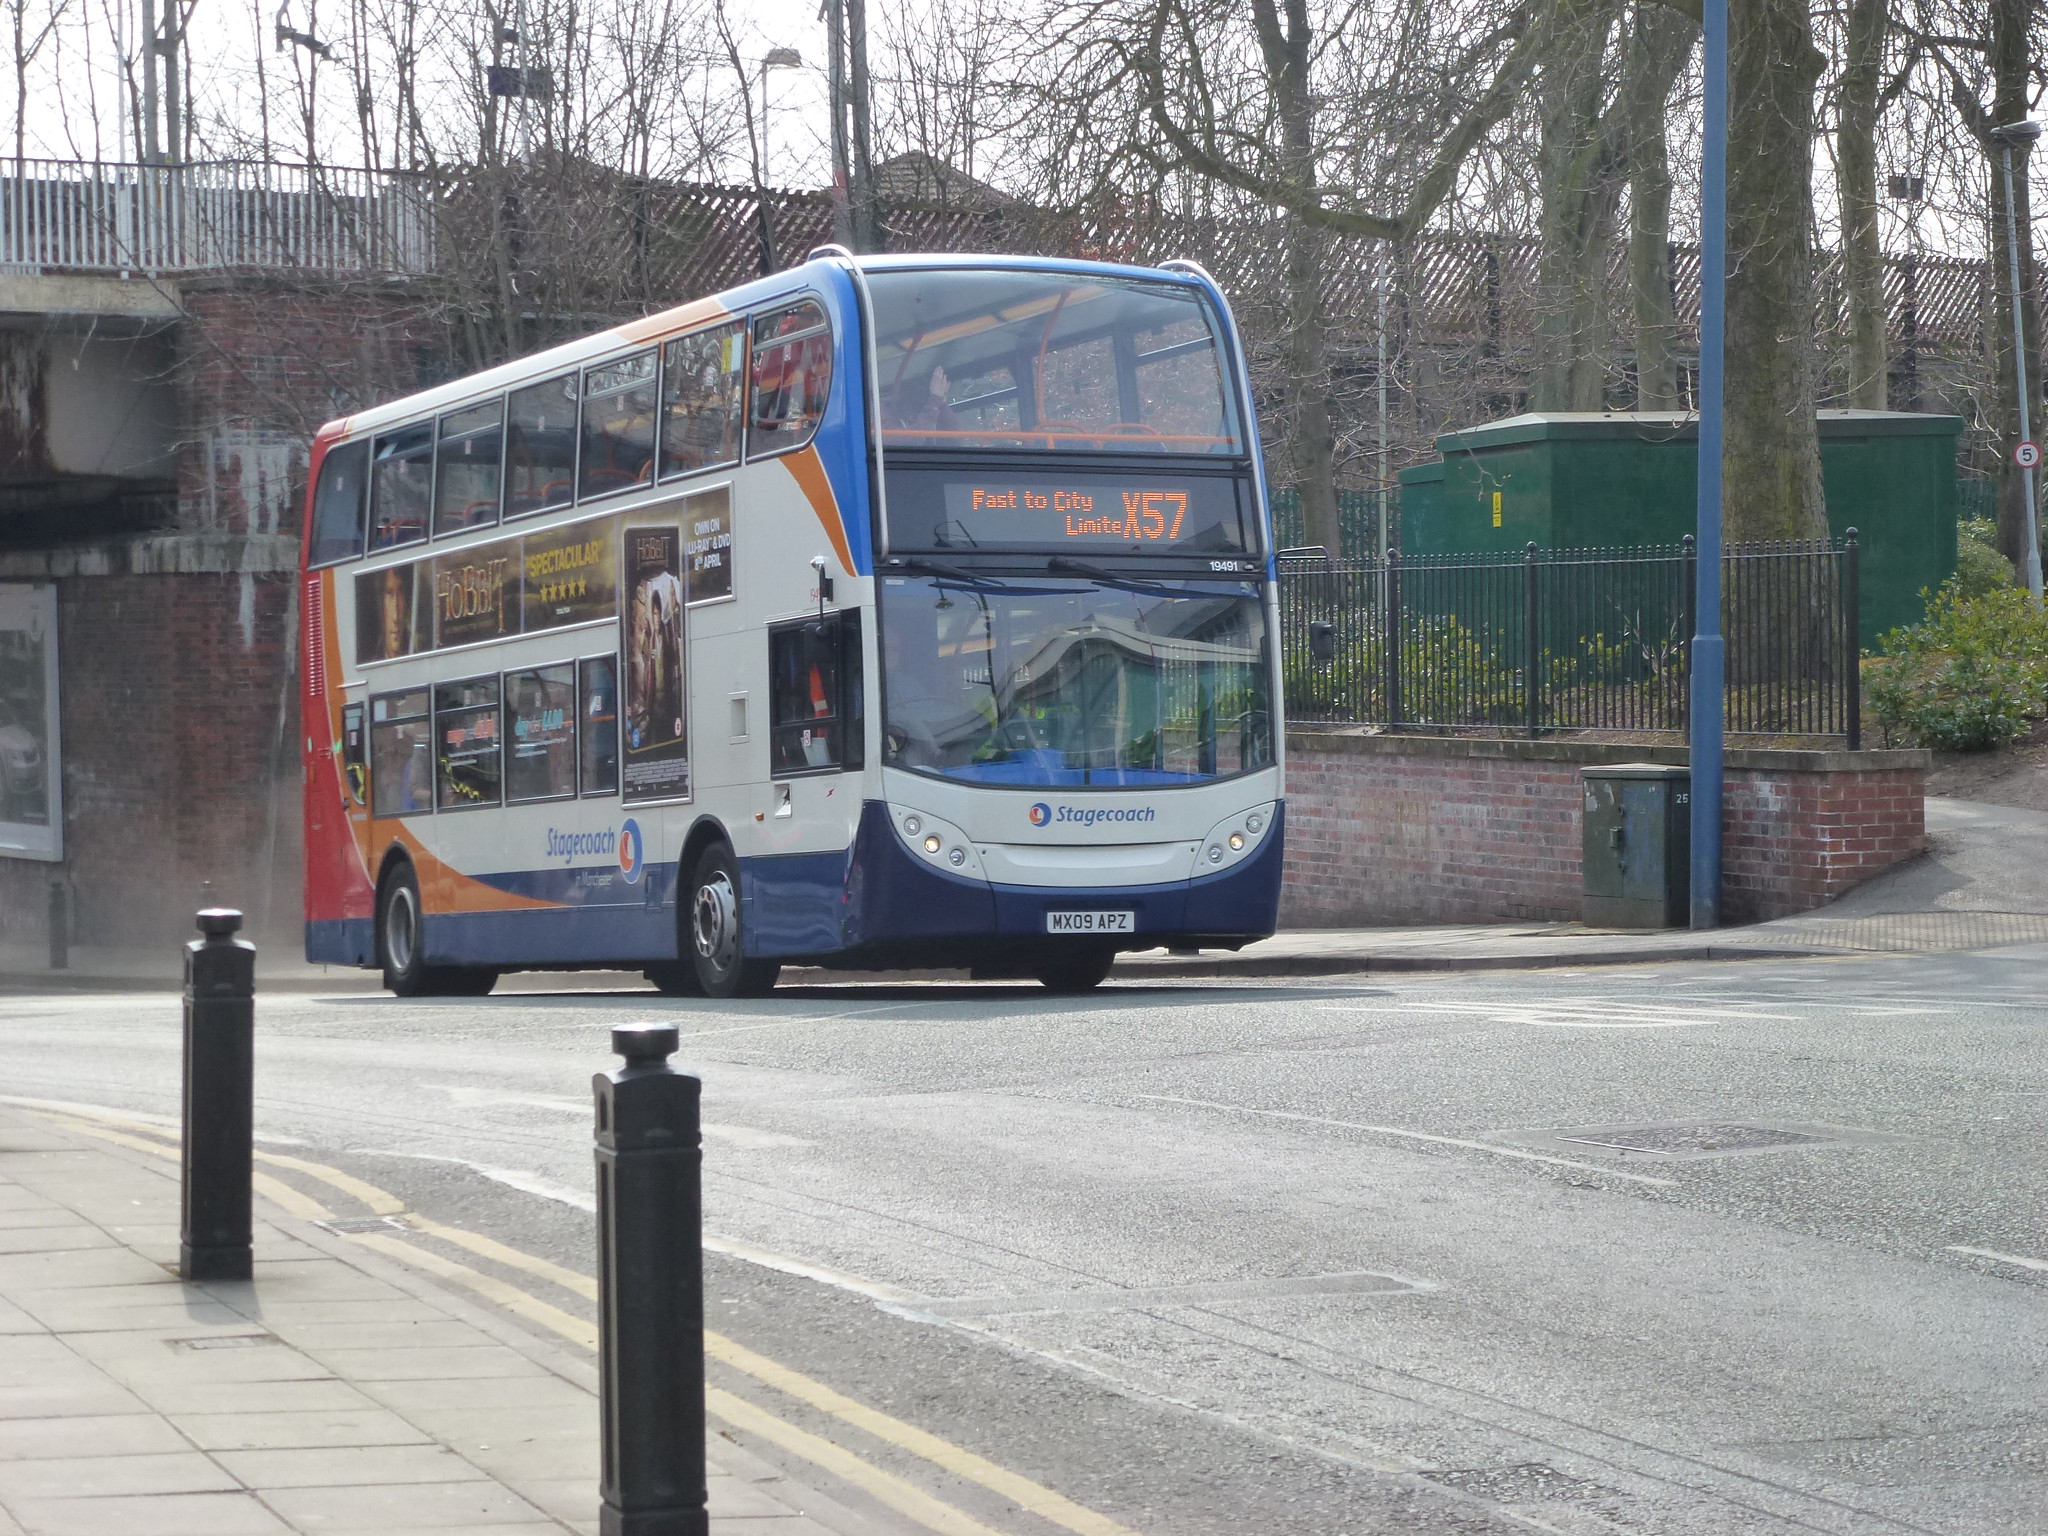 #AYearOfBuses 357: Manchester – Woodford